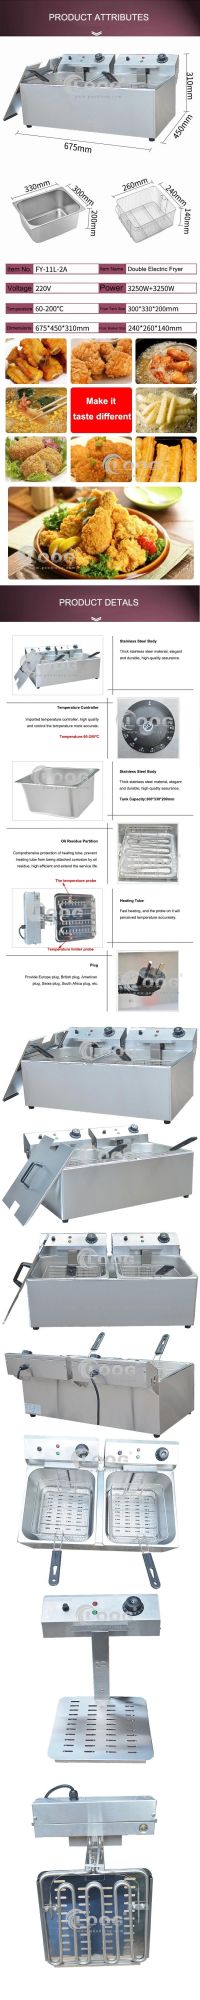 Large Commercial Deep Fryer Double Electric Fryer Stainless Steel Twin Basket Commercial Chip Fryer for Sale